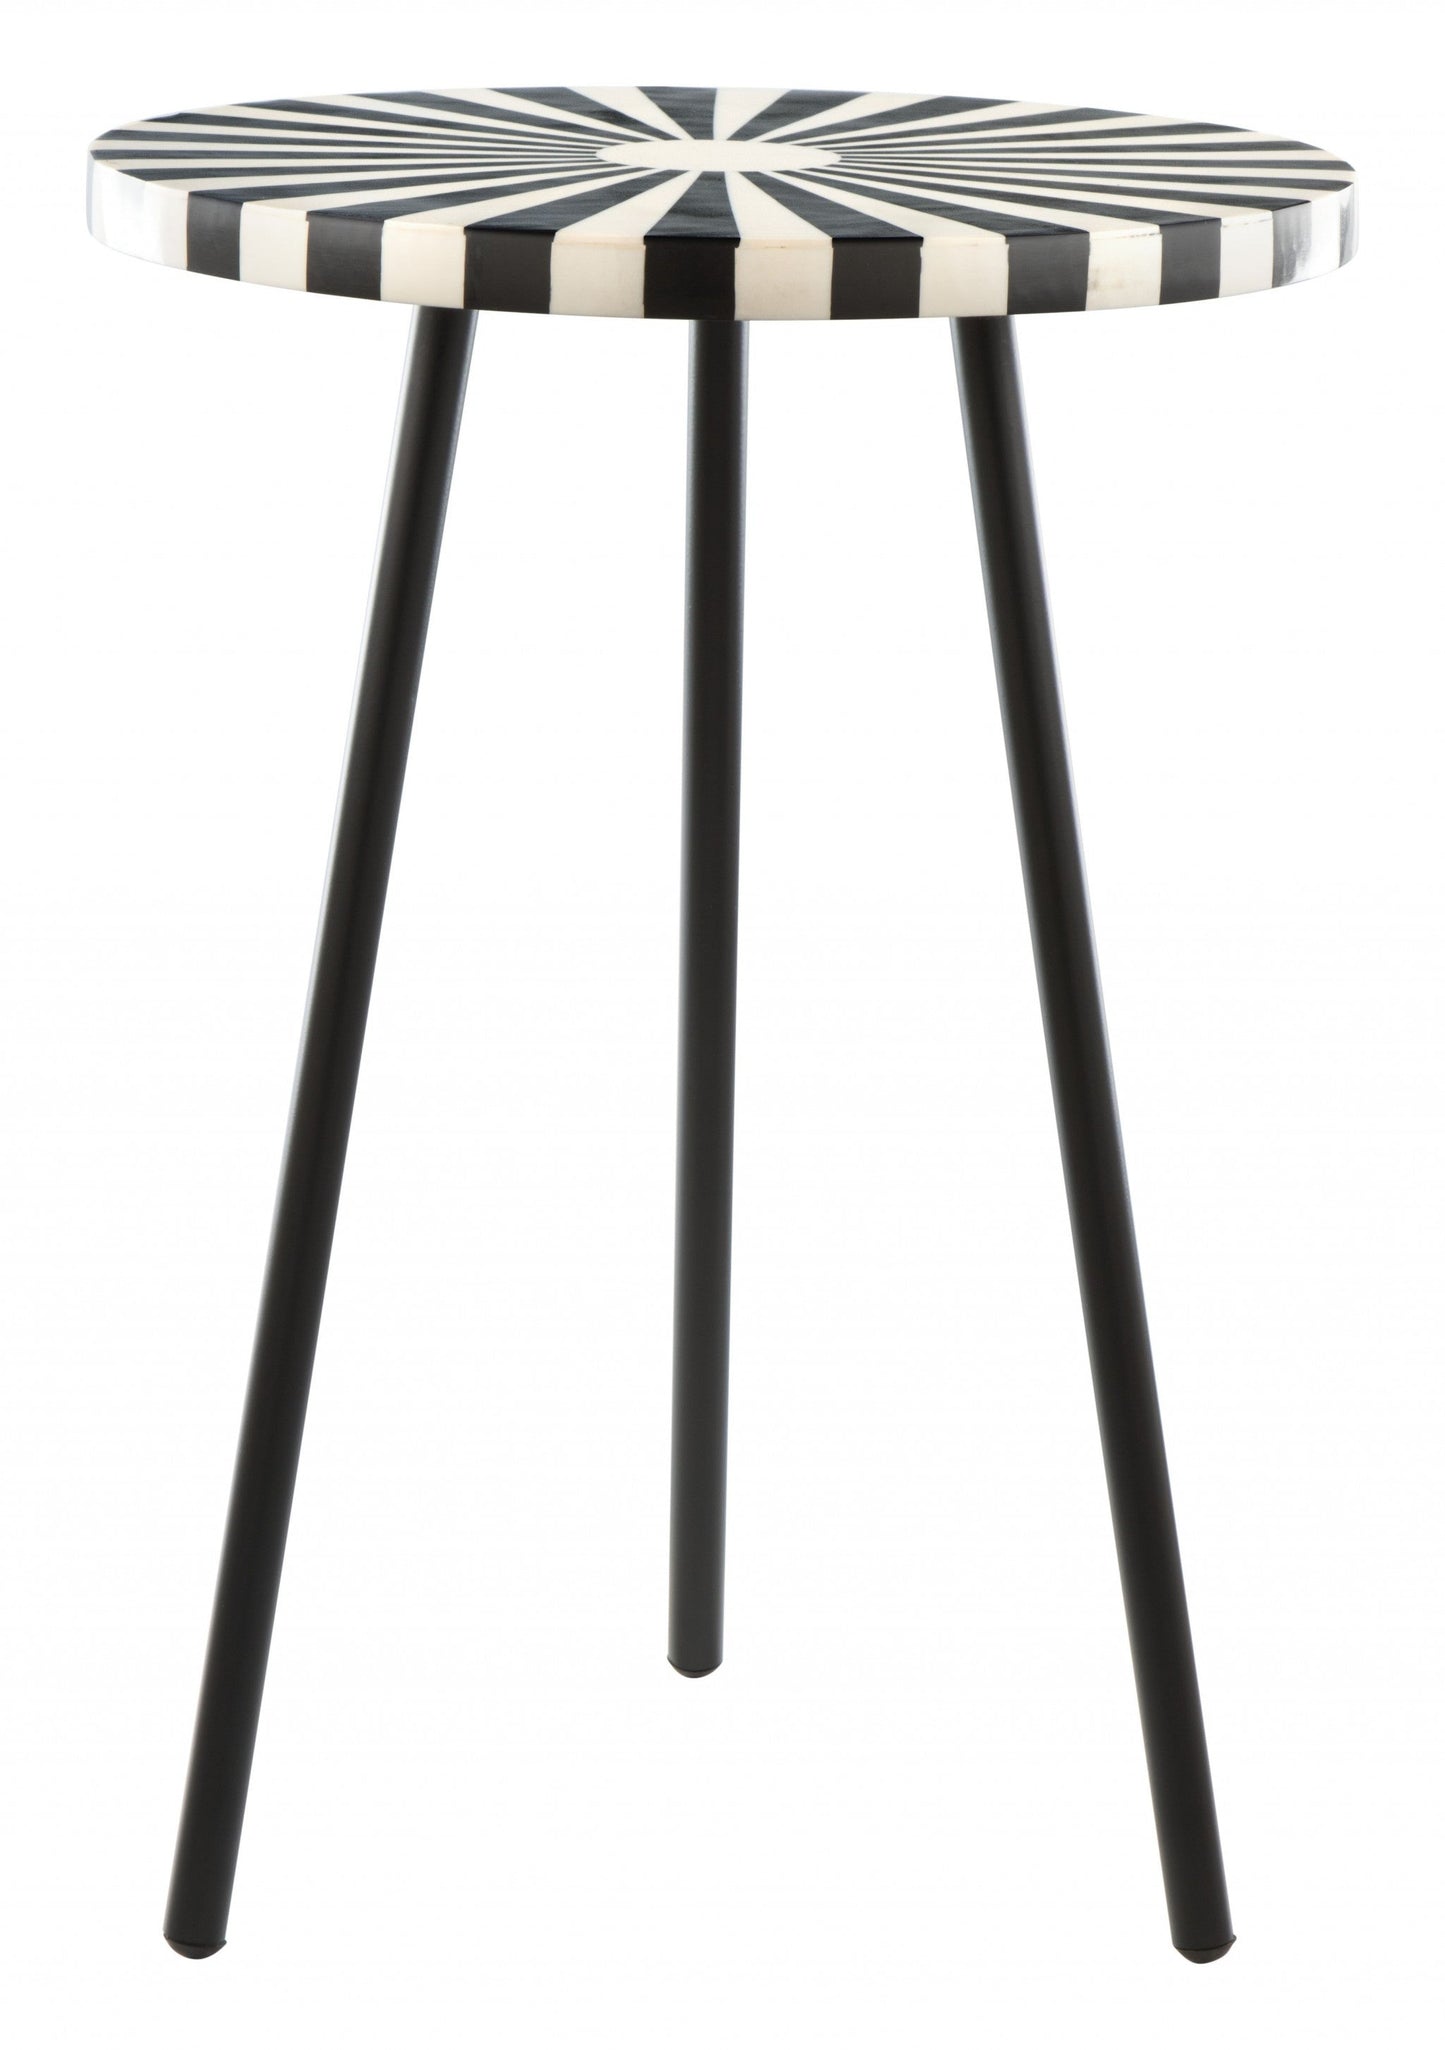 HomeRoots Alice Black and White Bold Side Table